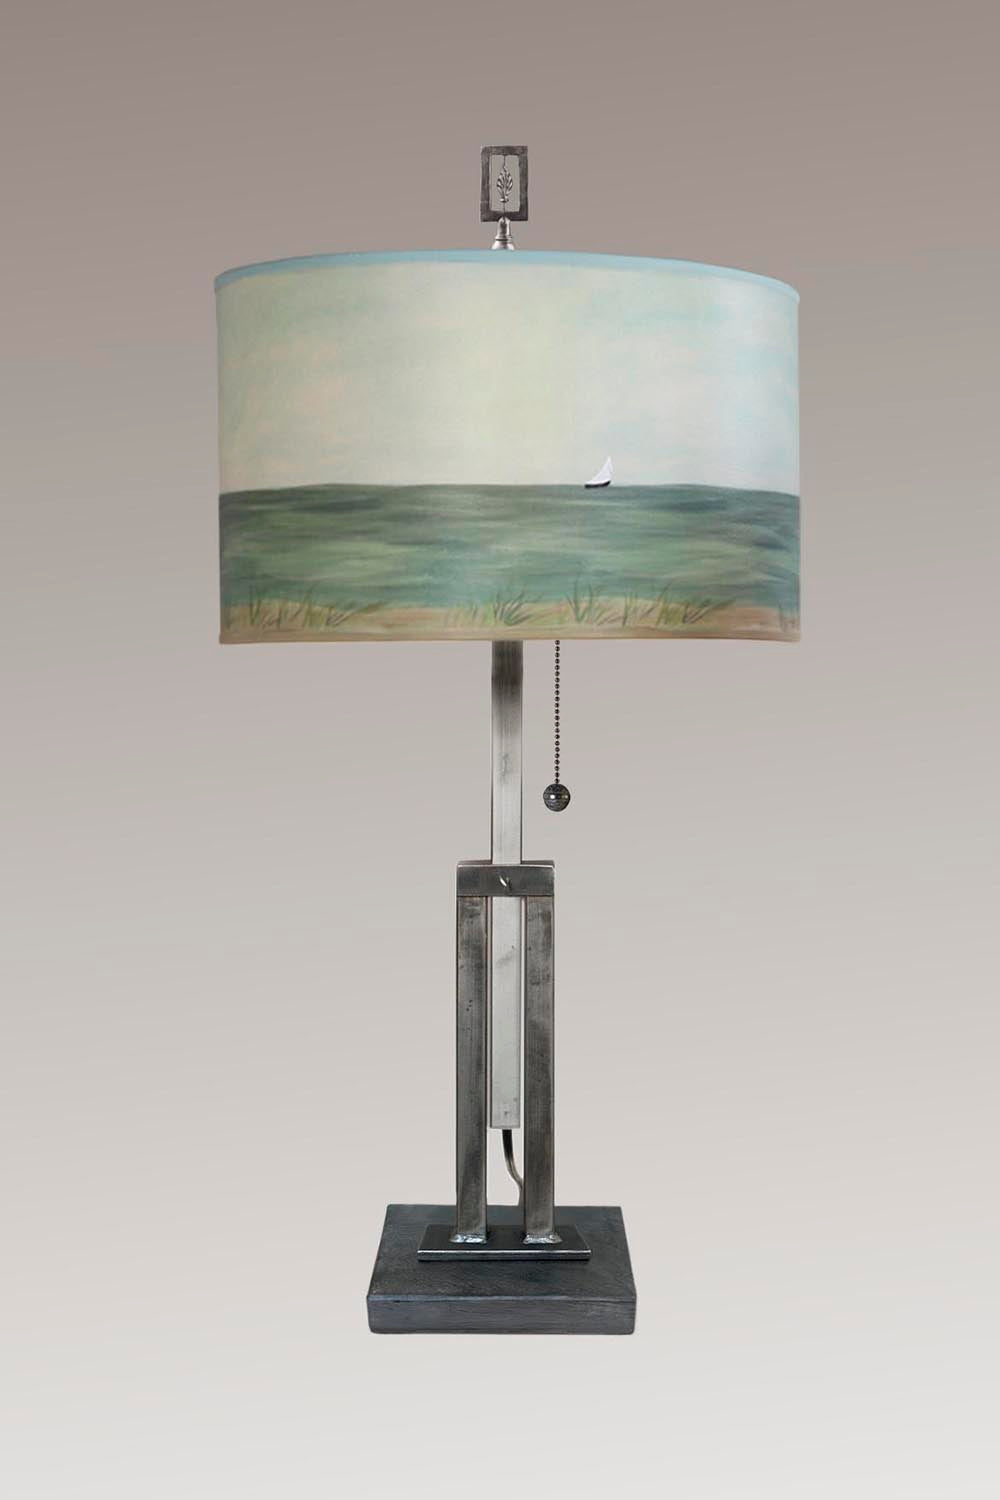 Janna Ugone &amp; Co Table Lamps Adjustable-Height Steel Table Lamp with Large Drum Shade in Shore